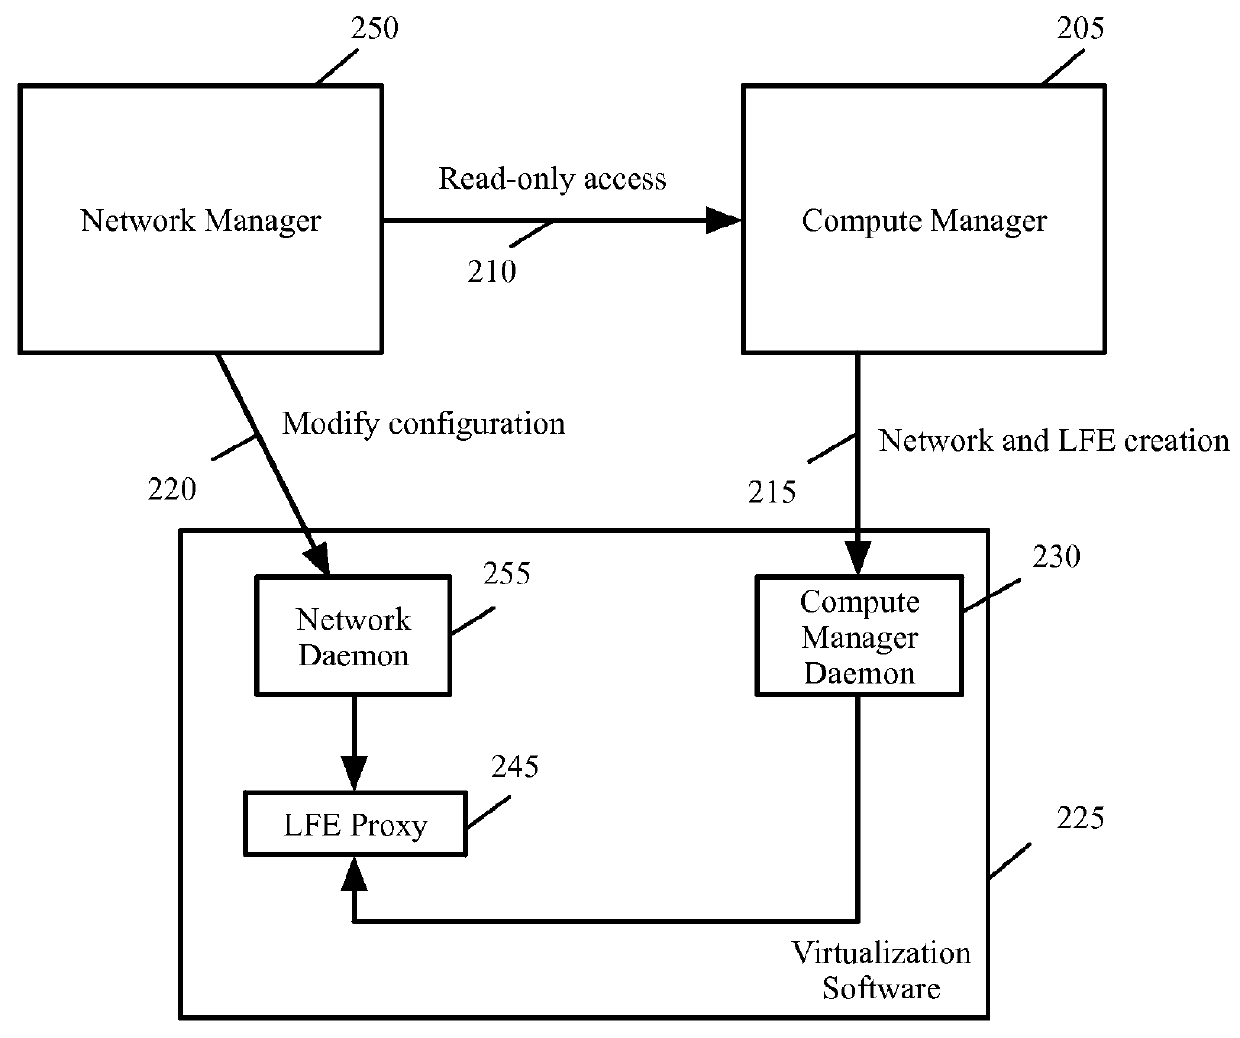 Enabling virtual machines access to switches configured by different management entities